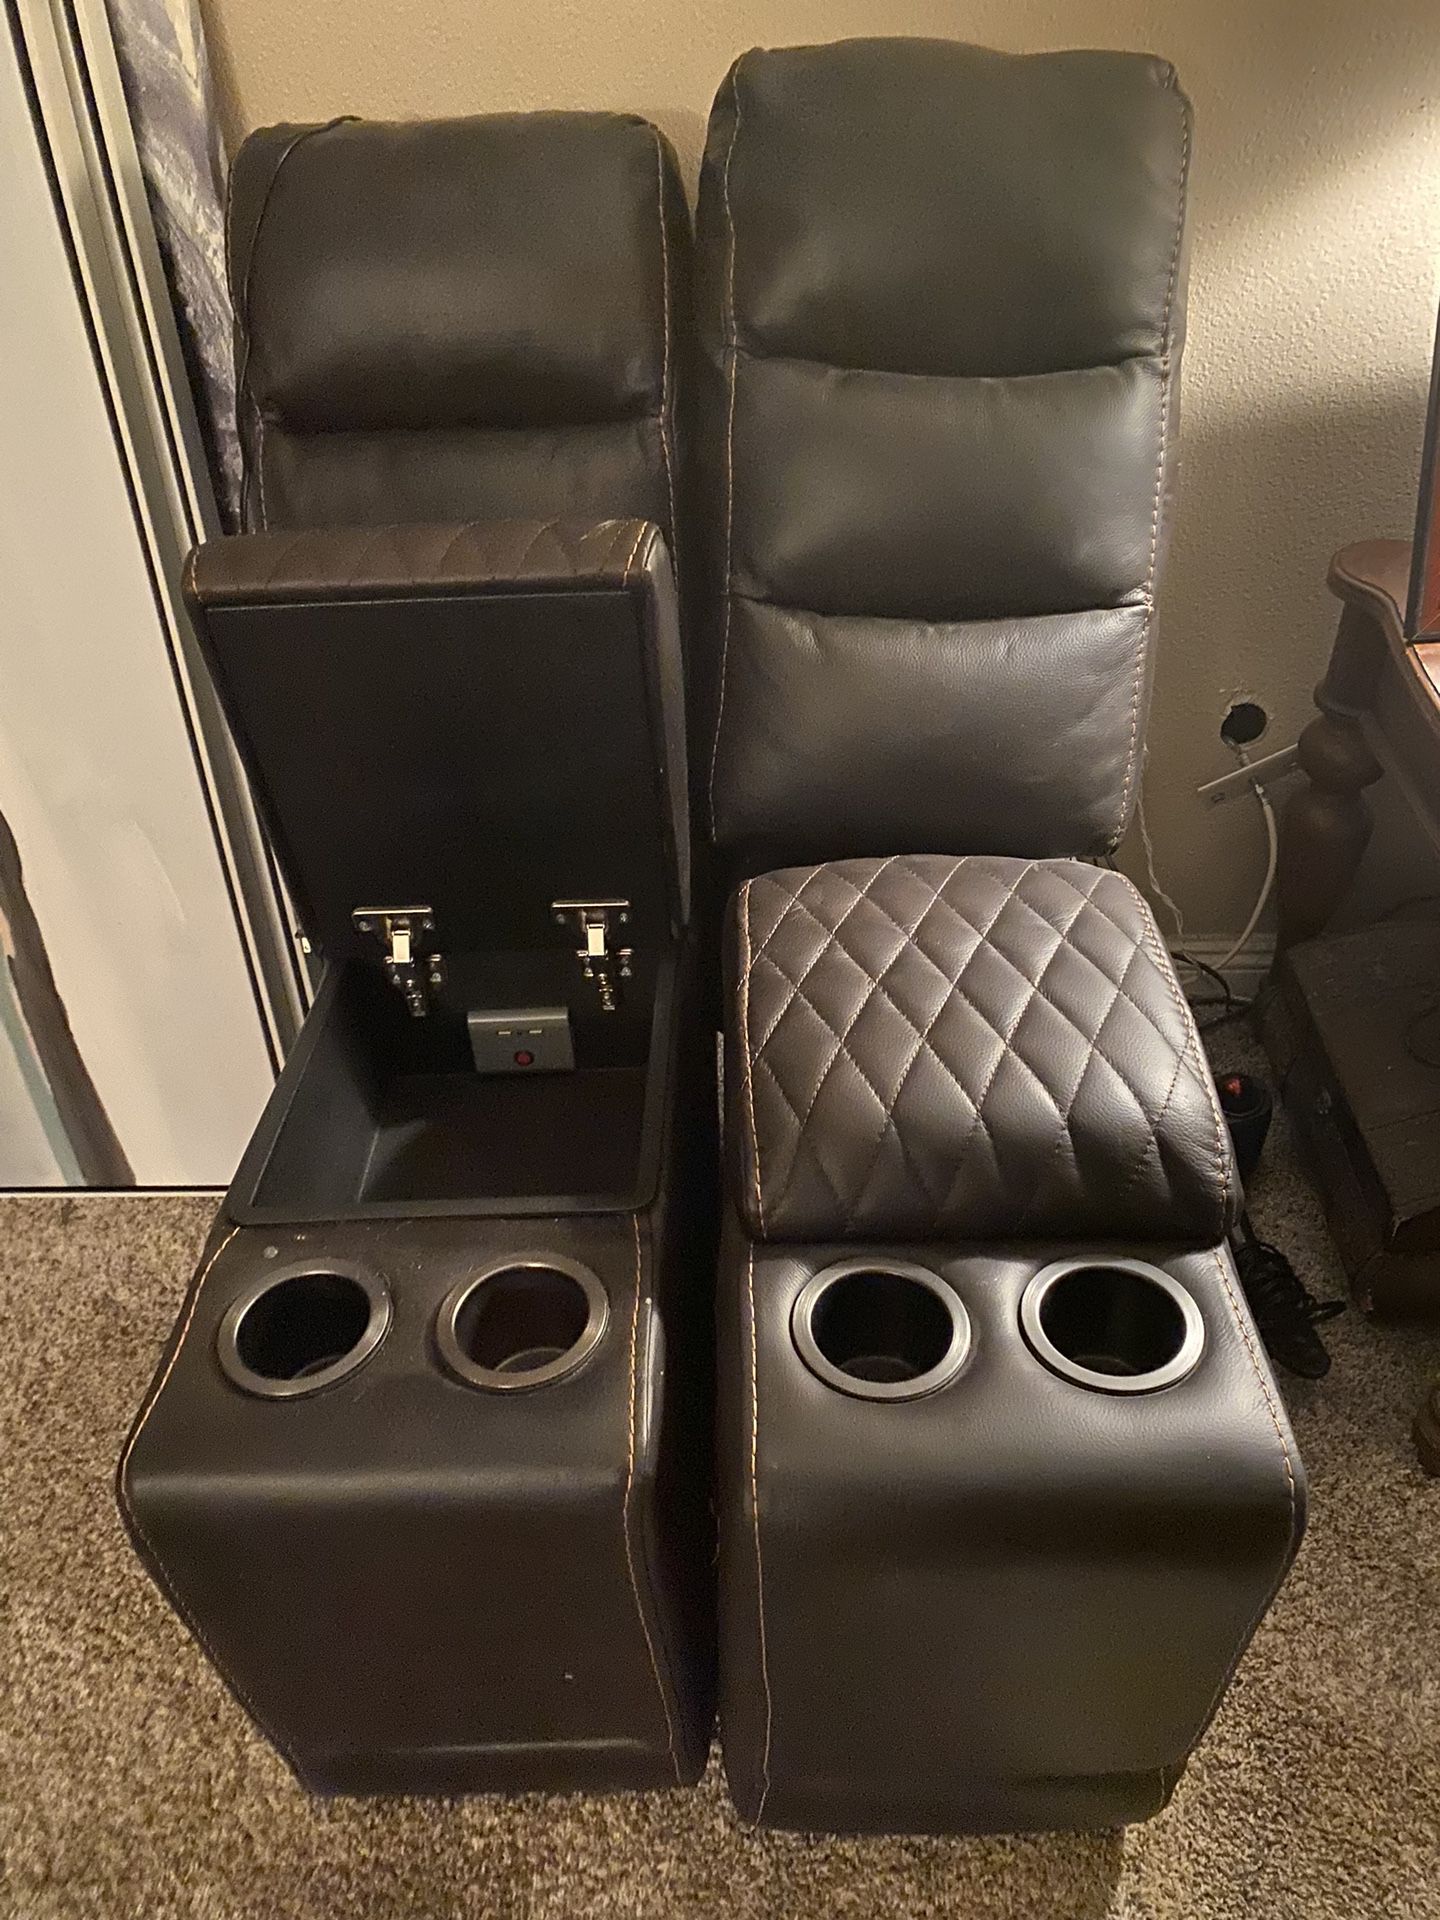  Leather Consoles for Recliner Sofas (2)